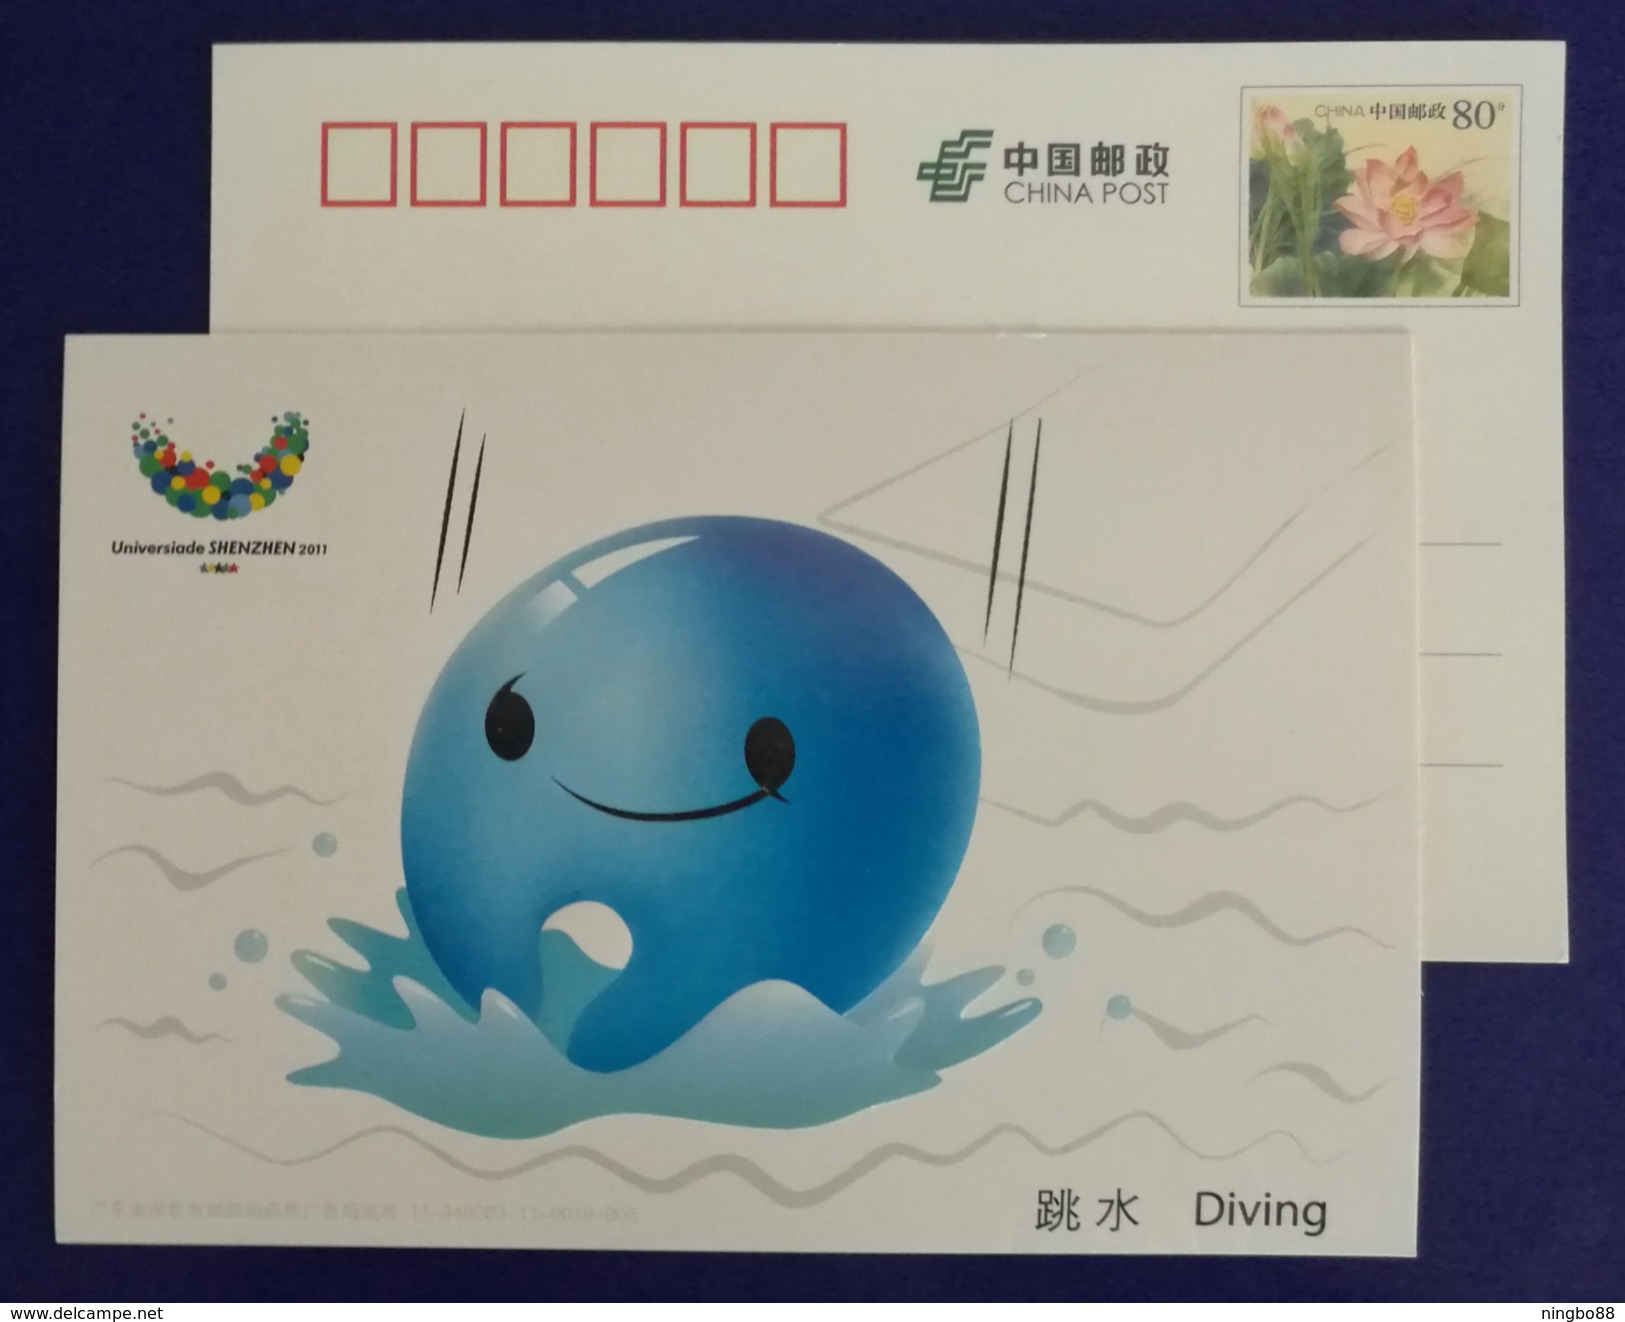 Diving Event,CN 11 Shenzhen 2011 Summer Universiade Mascot Concave-convex Printing Advertising Pre-stamped Card - Diving